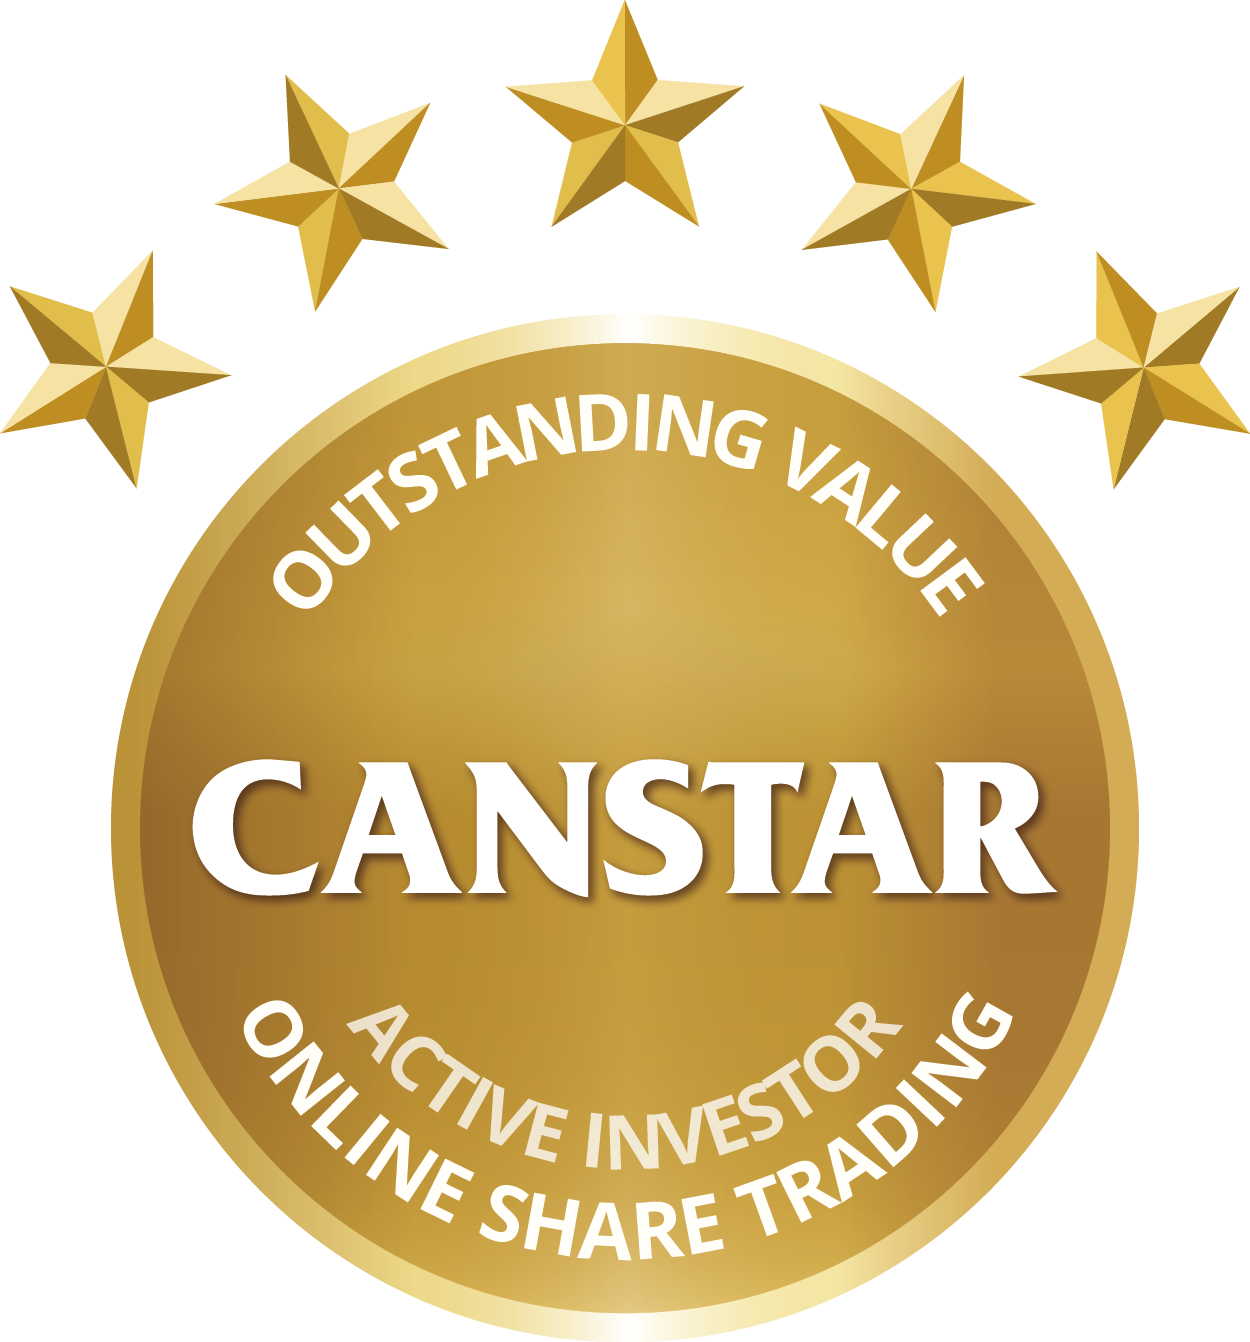 Canstar Outstanding Value for Active Investors